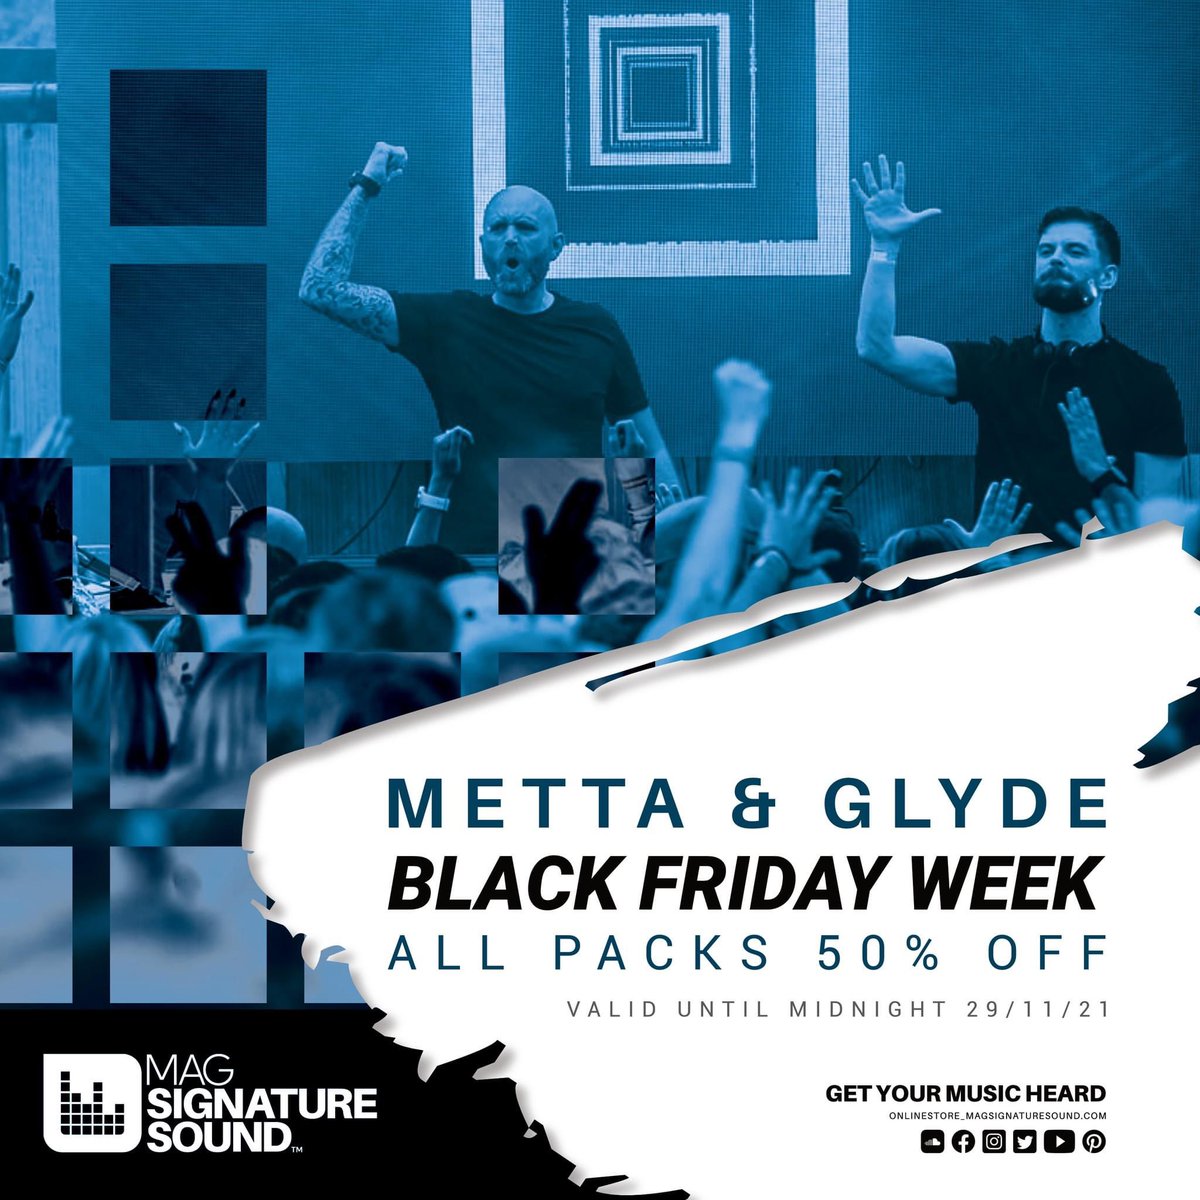 BLACK FRIDAY WEEK IS HERE!!! ALL PACKS 50% OFF 🔥🎹🔥 Including all Metta & Glyde Sample Packs, MIDI Packs, Templates, Tutorials & more!!! Valid until midnight 29/11/21 magsignaturesound.com